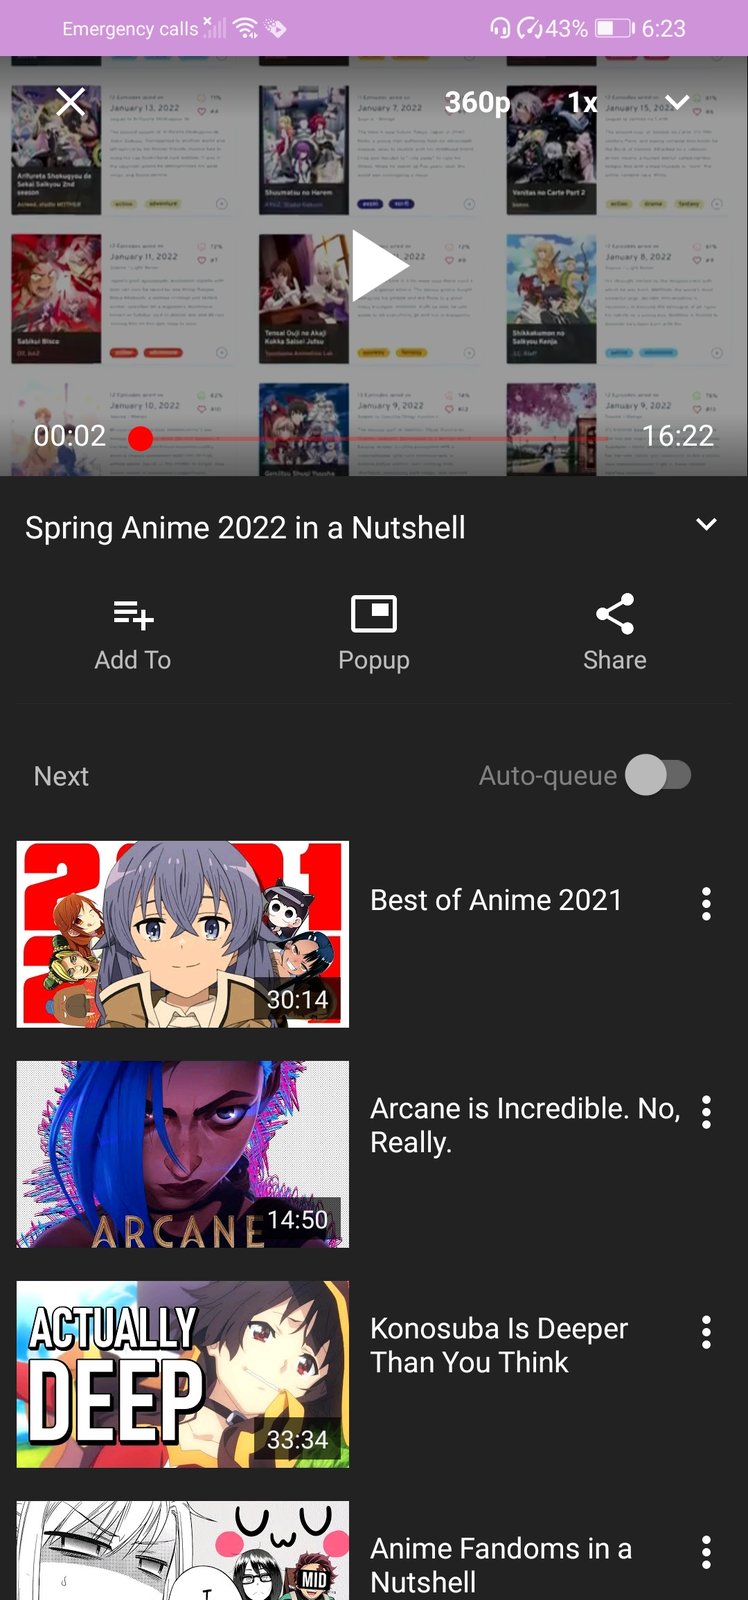 Anime TV - Anime Music Videos v1.5.0 [Premium] [Mod] APK -  -  Android & iOS MODs, Mobile Games & Apps